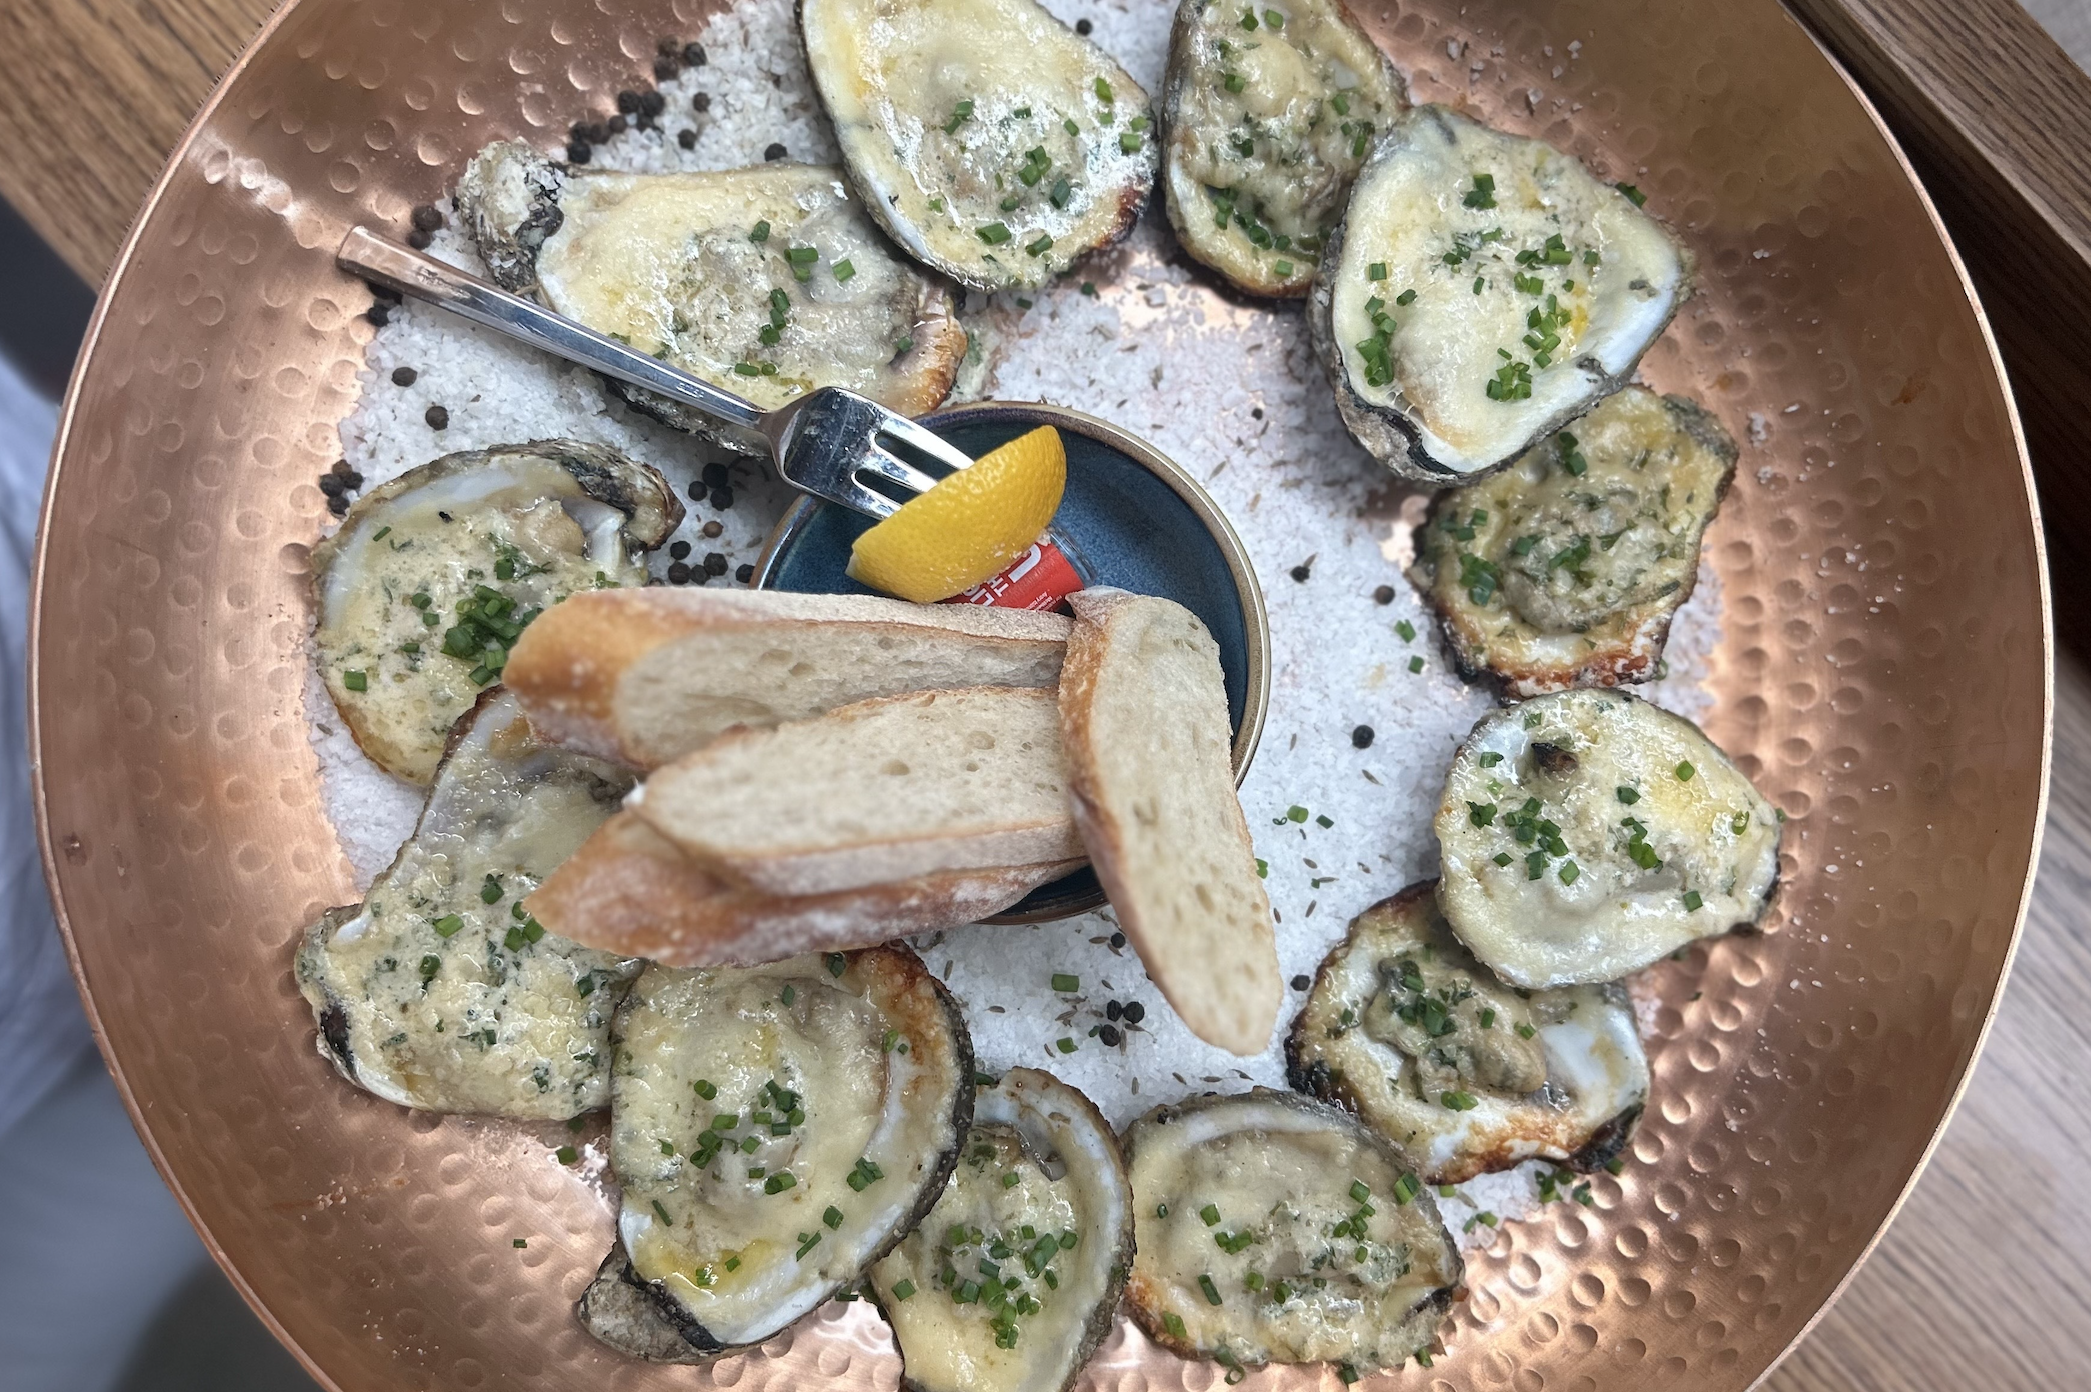 I recently picked up a cast iron oyster tray for charbroiled